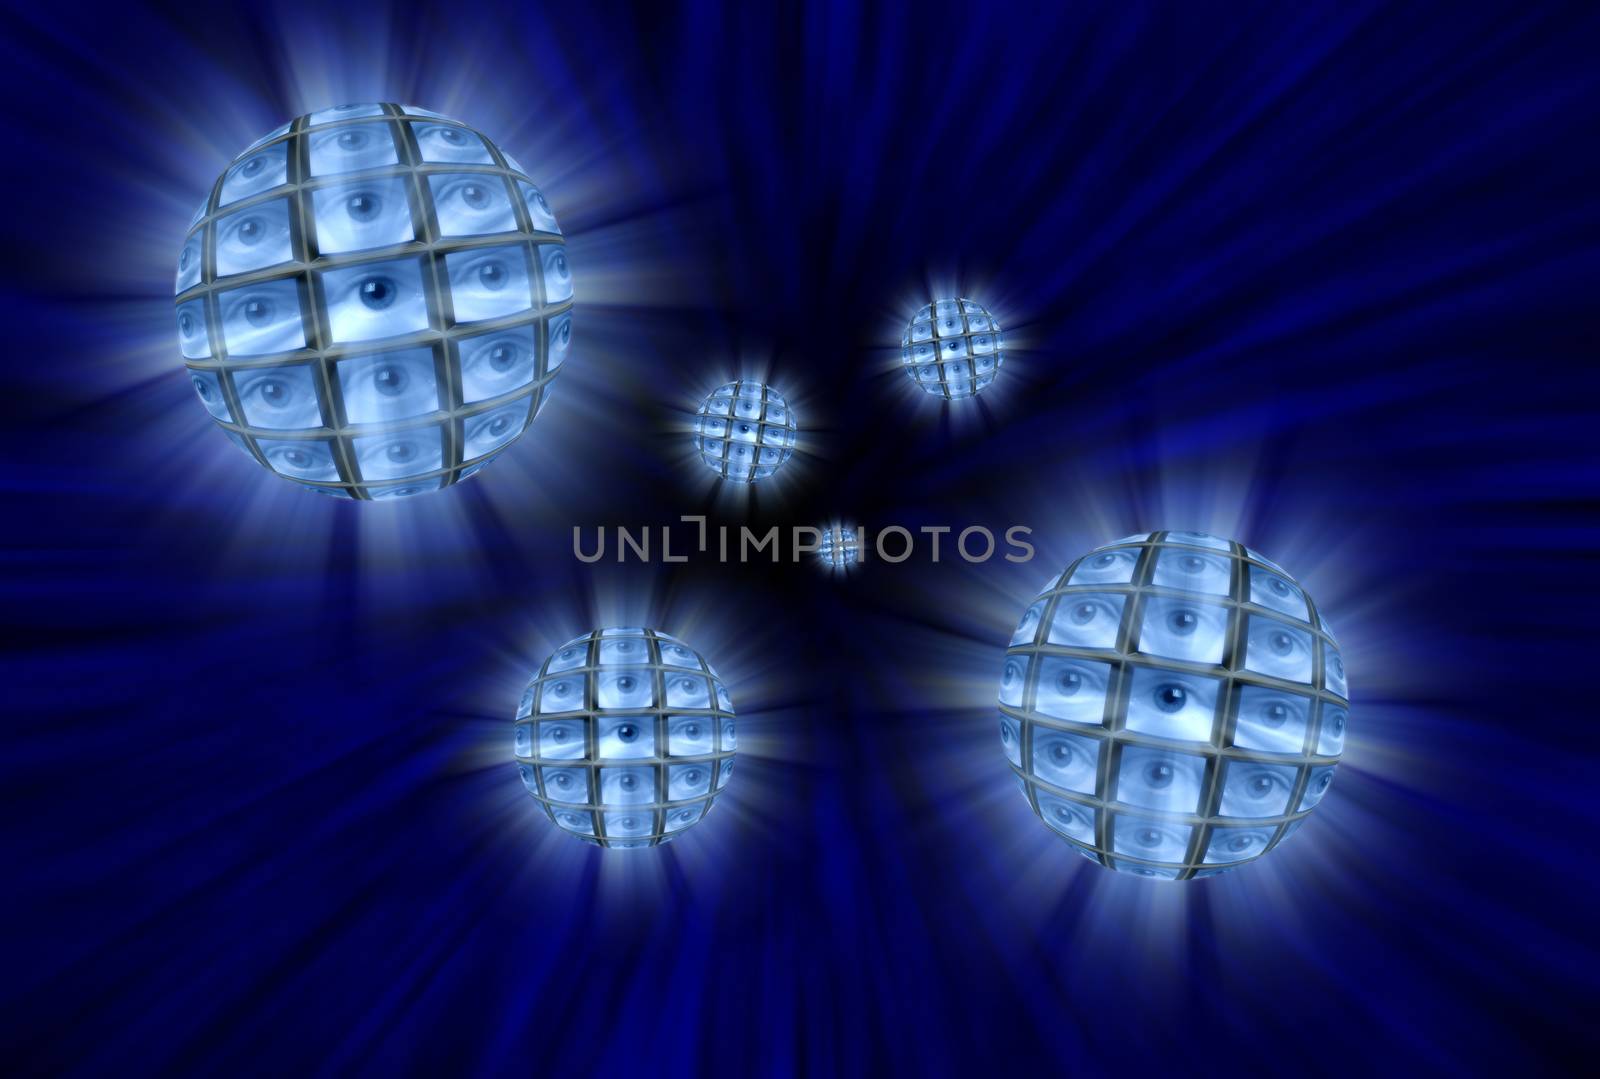 Spheres with video screens showing eyes moving through a blue vortex